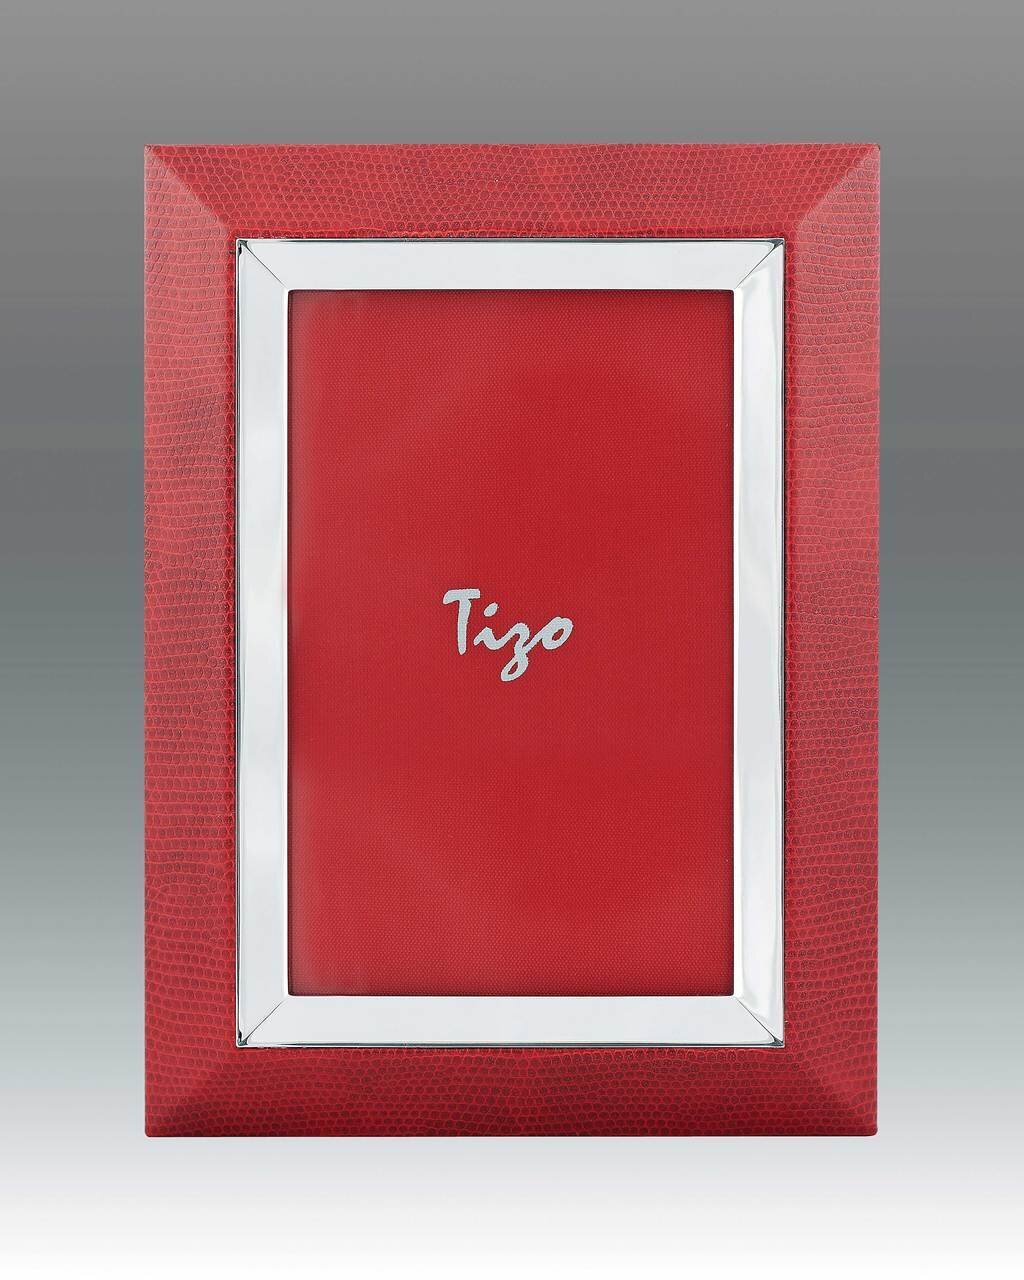 Tizo 5 x 7 Inch Red Queen Lizard Silver Plated Picture Frame 2003RED-57